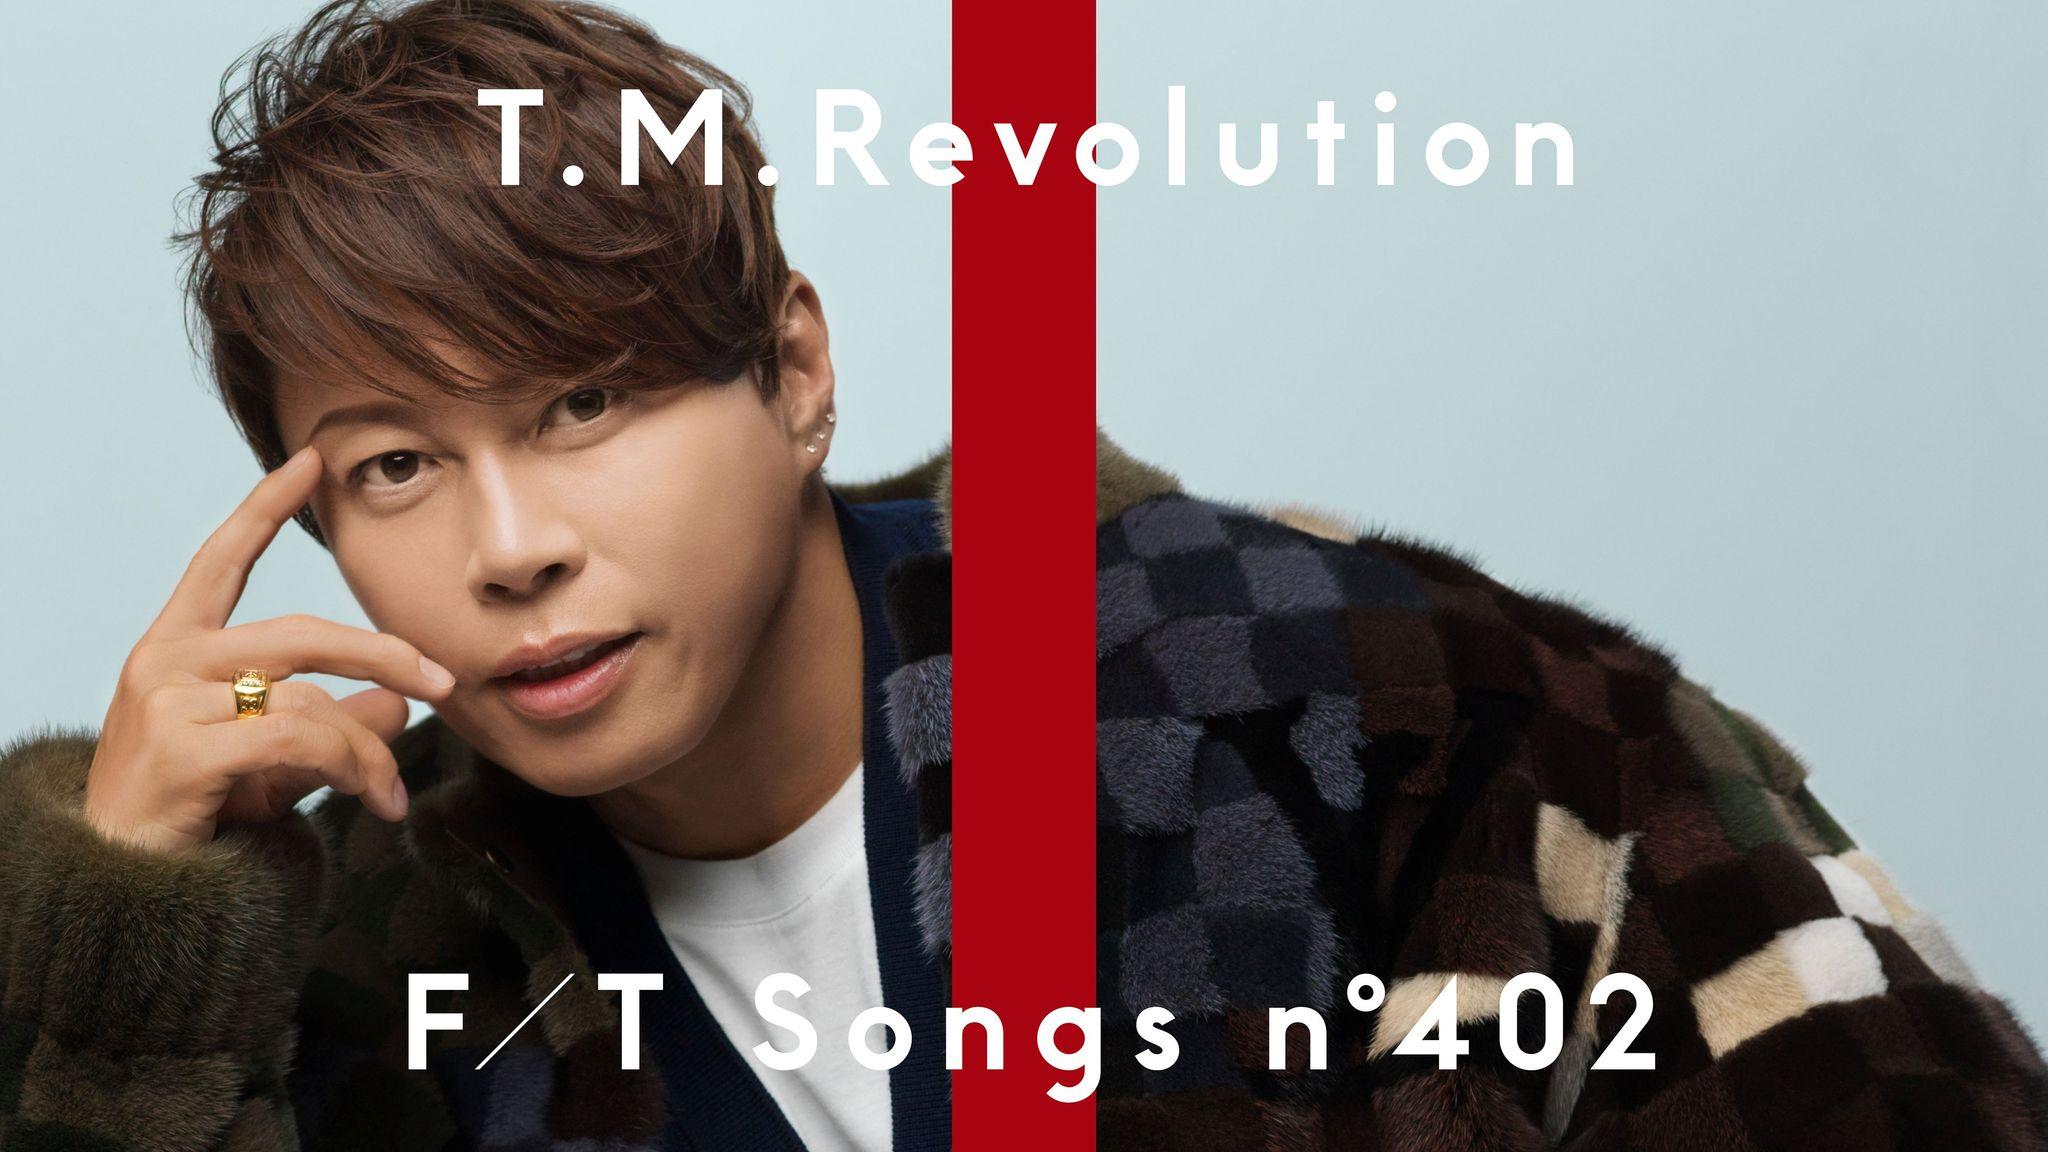 T.M.Revolution「THE FIRST TAKE」に初登場！冬の名曲「WHITE BREATH」を熱唱